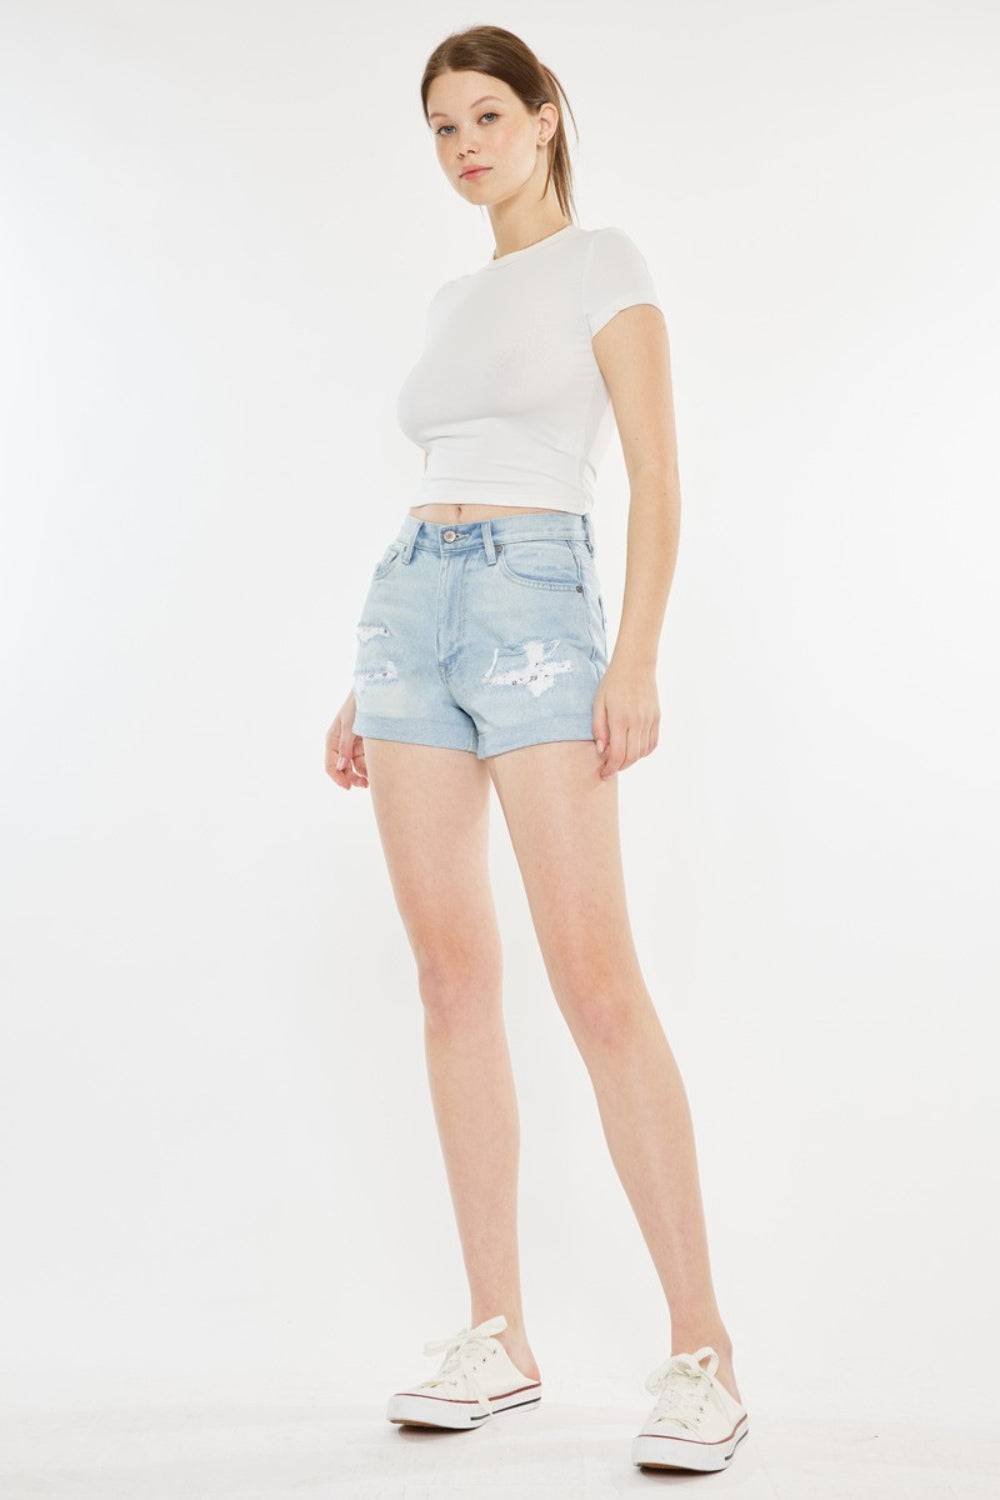 a woman in white shirt and shorts posing for a picture